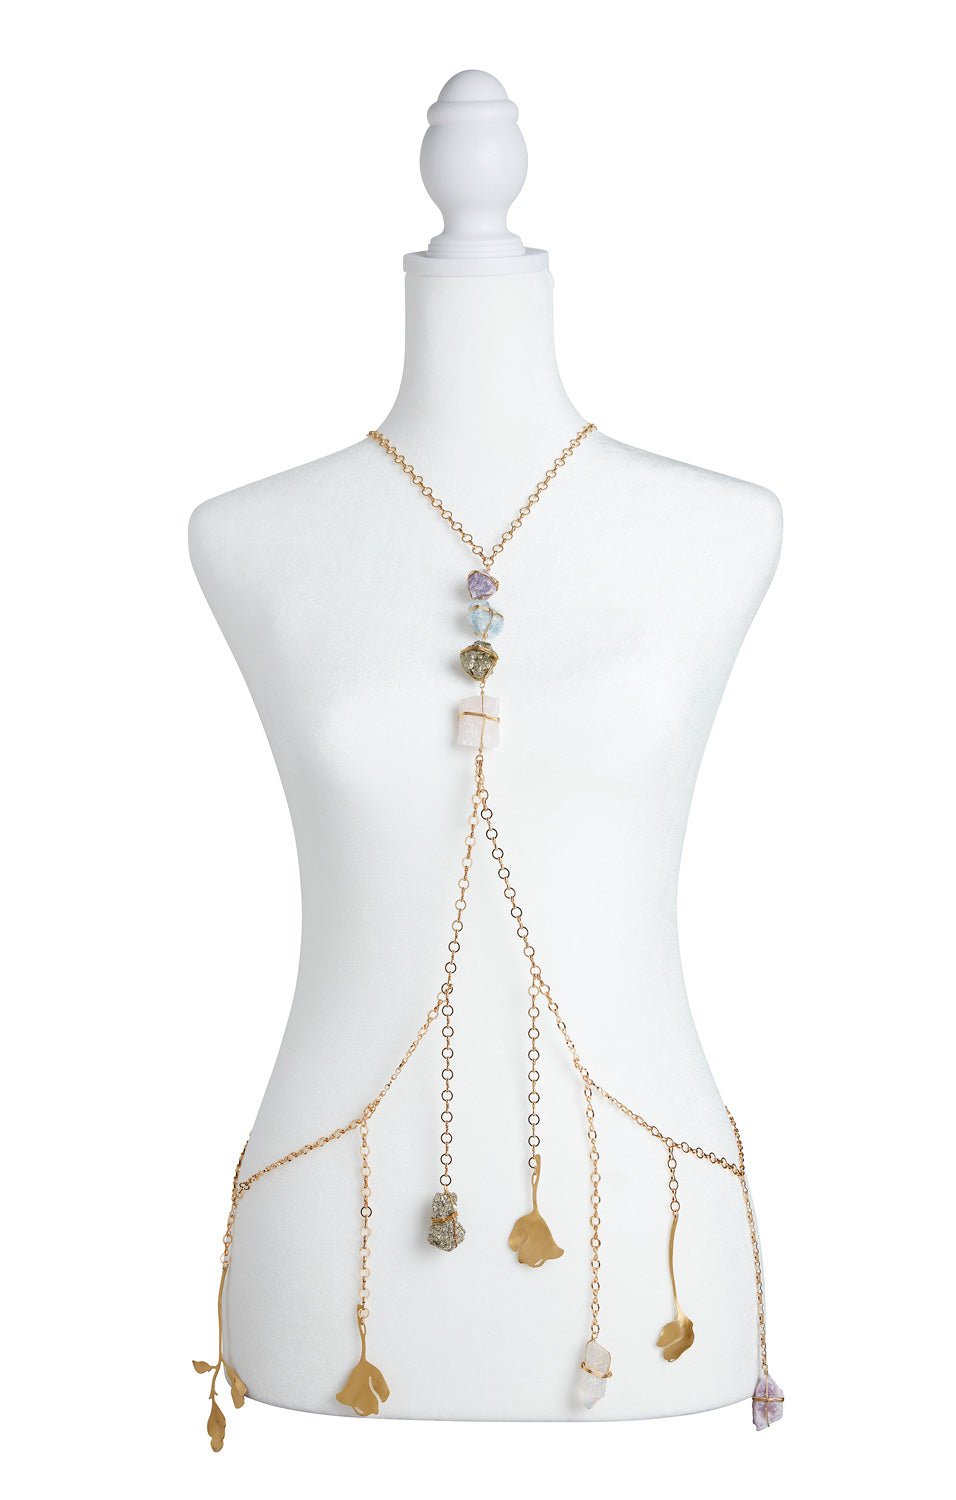 Floral Healing Crystal and Chain Body Jewelry - Ariana Ost